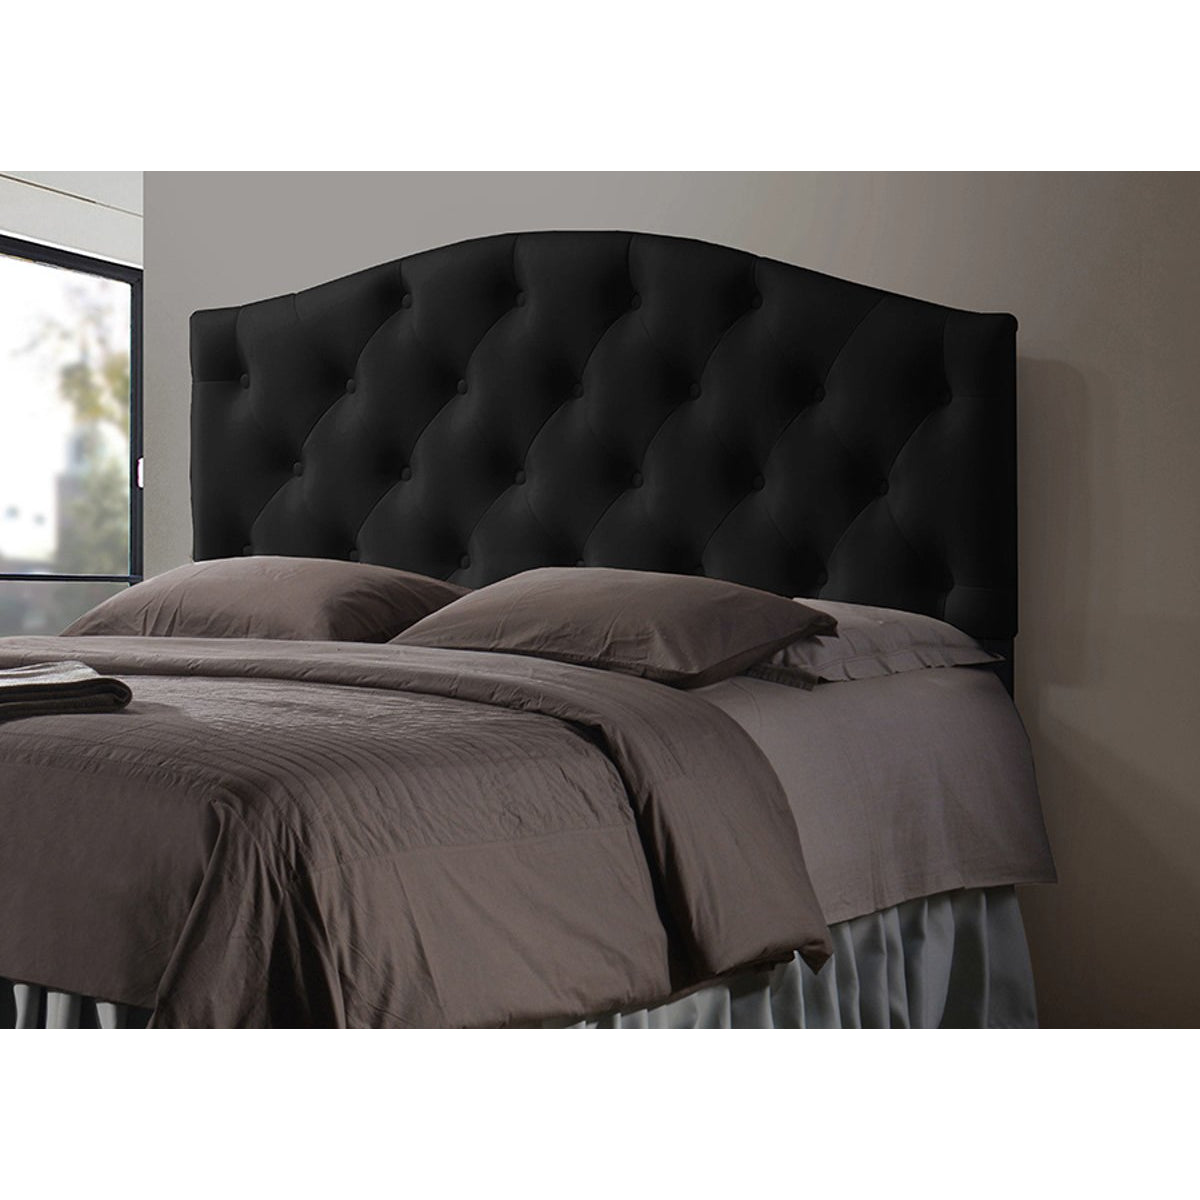 Baxton Studio Myra Modern and Contemporary Queen Size Black Faux Leather Upholstered Button-tufted Scalloped Headboard Baxton Studio-Headboards-Minimal And Modern - 2